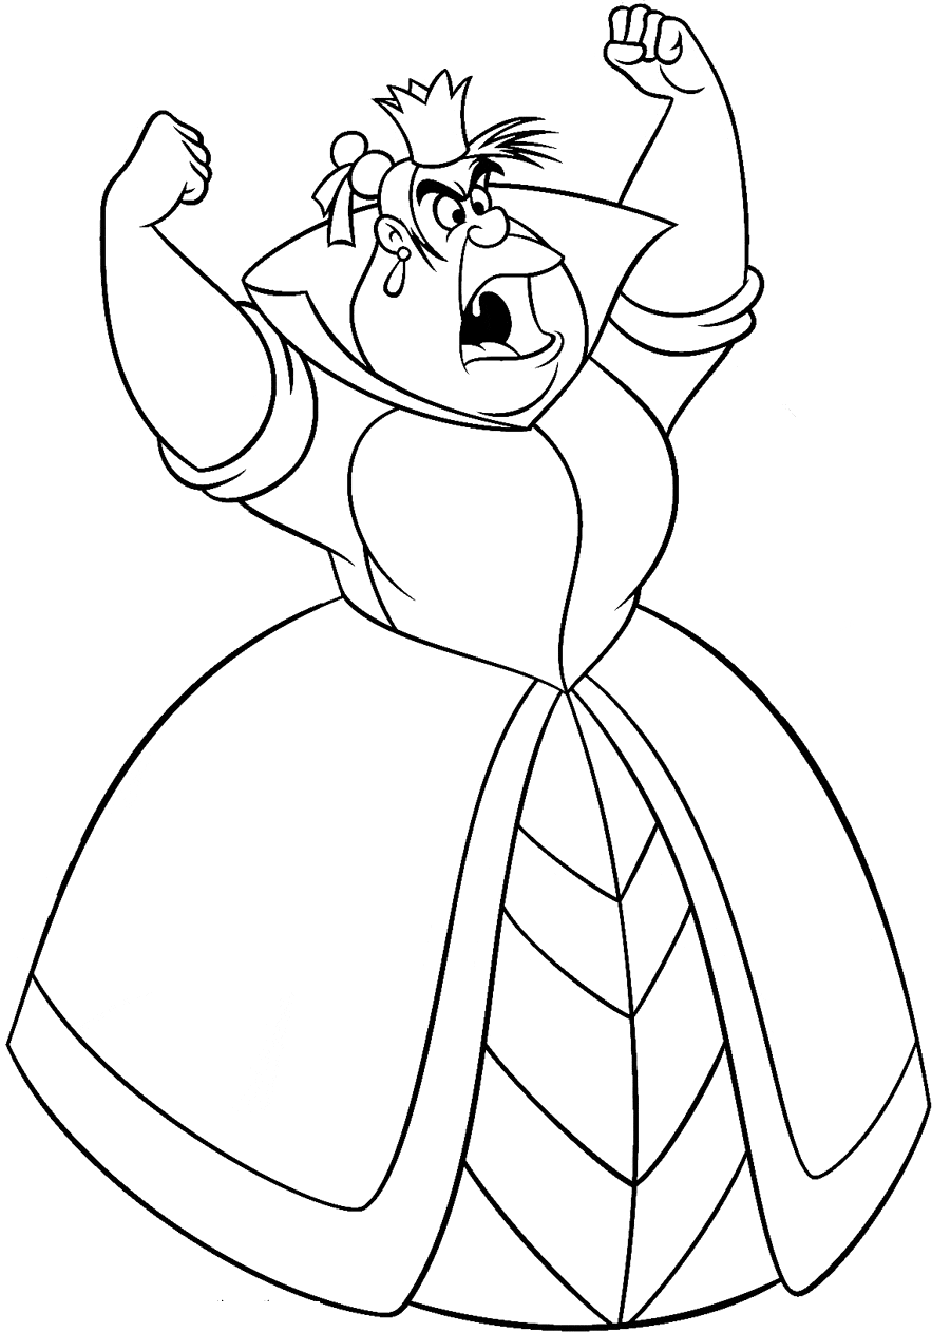 Alice In Wonderland Queen Of Hearts Angry coloring picture for ...